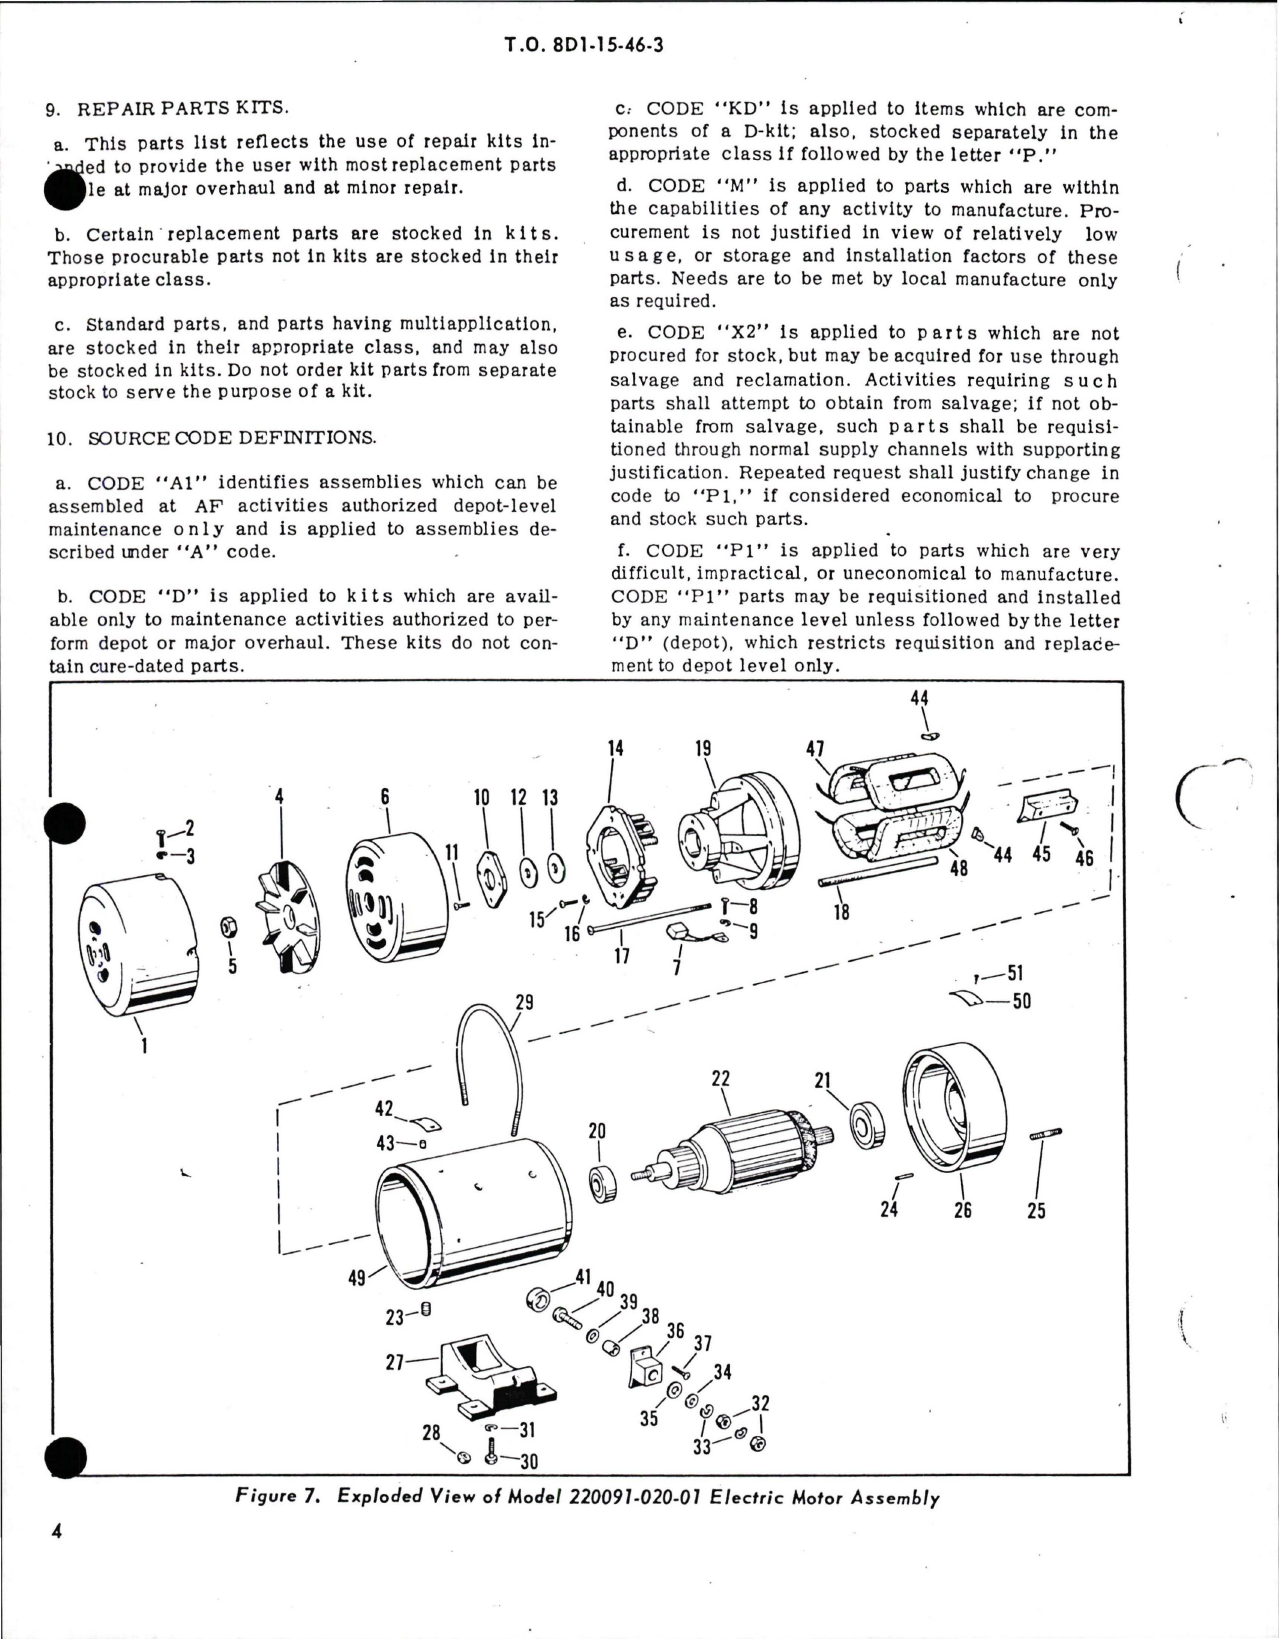 Sample page 5 from AirCorps Library document: Overhaul with Parts Breakdown for Electric Motor Assembly - Model 220091-020-01